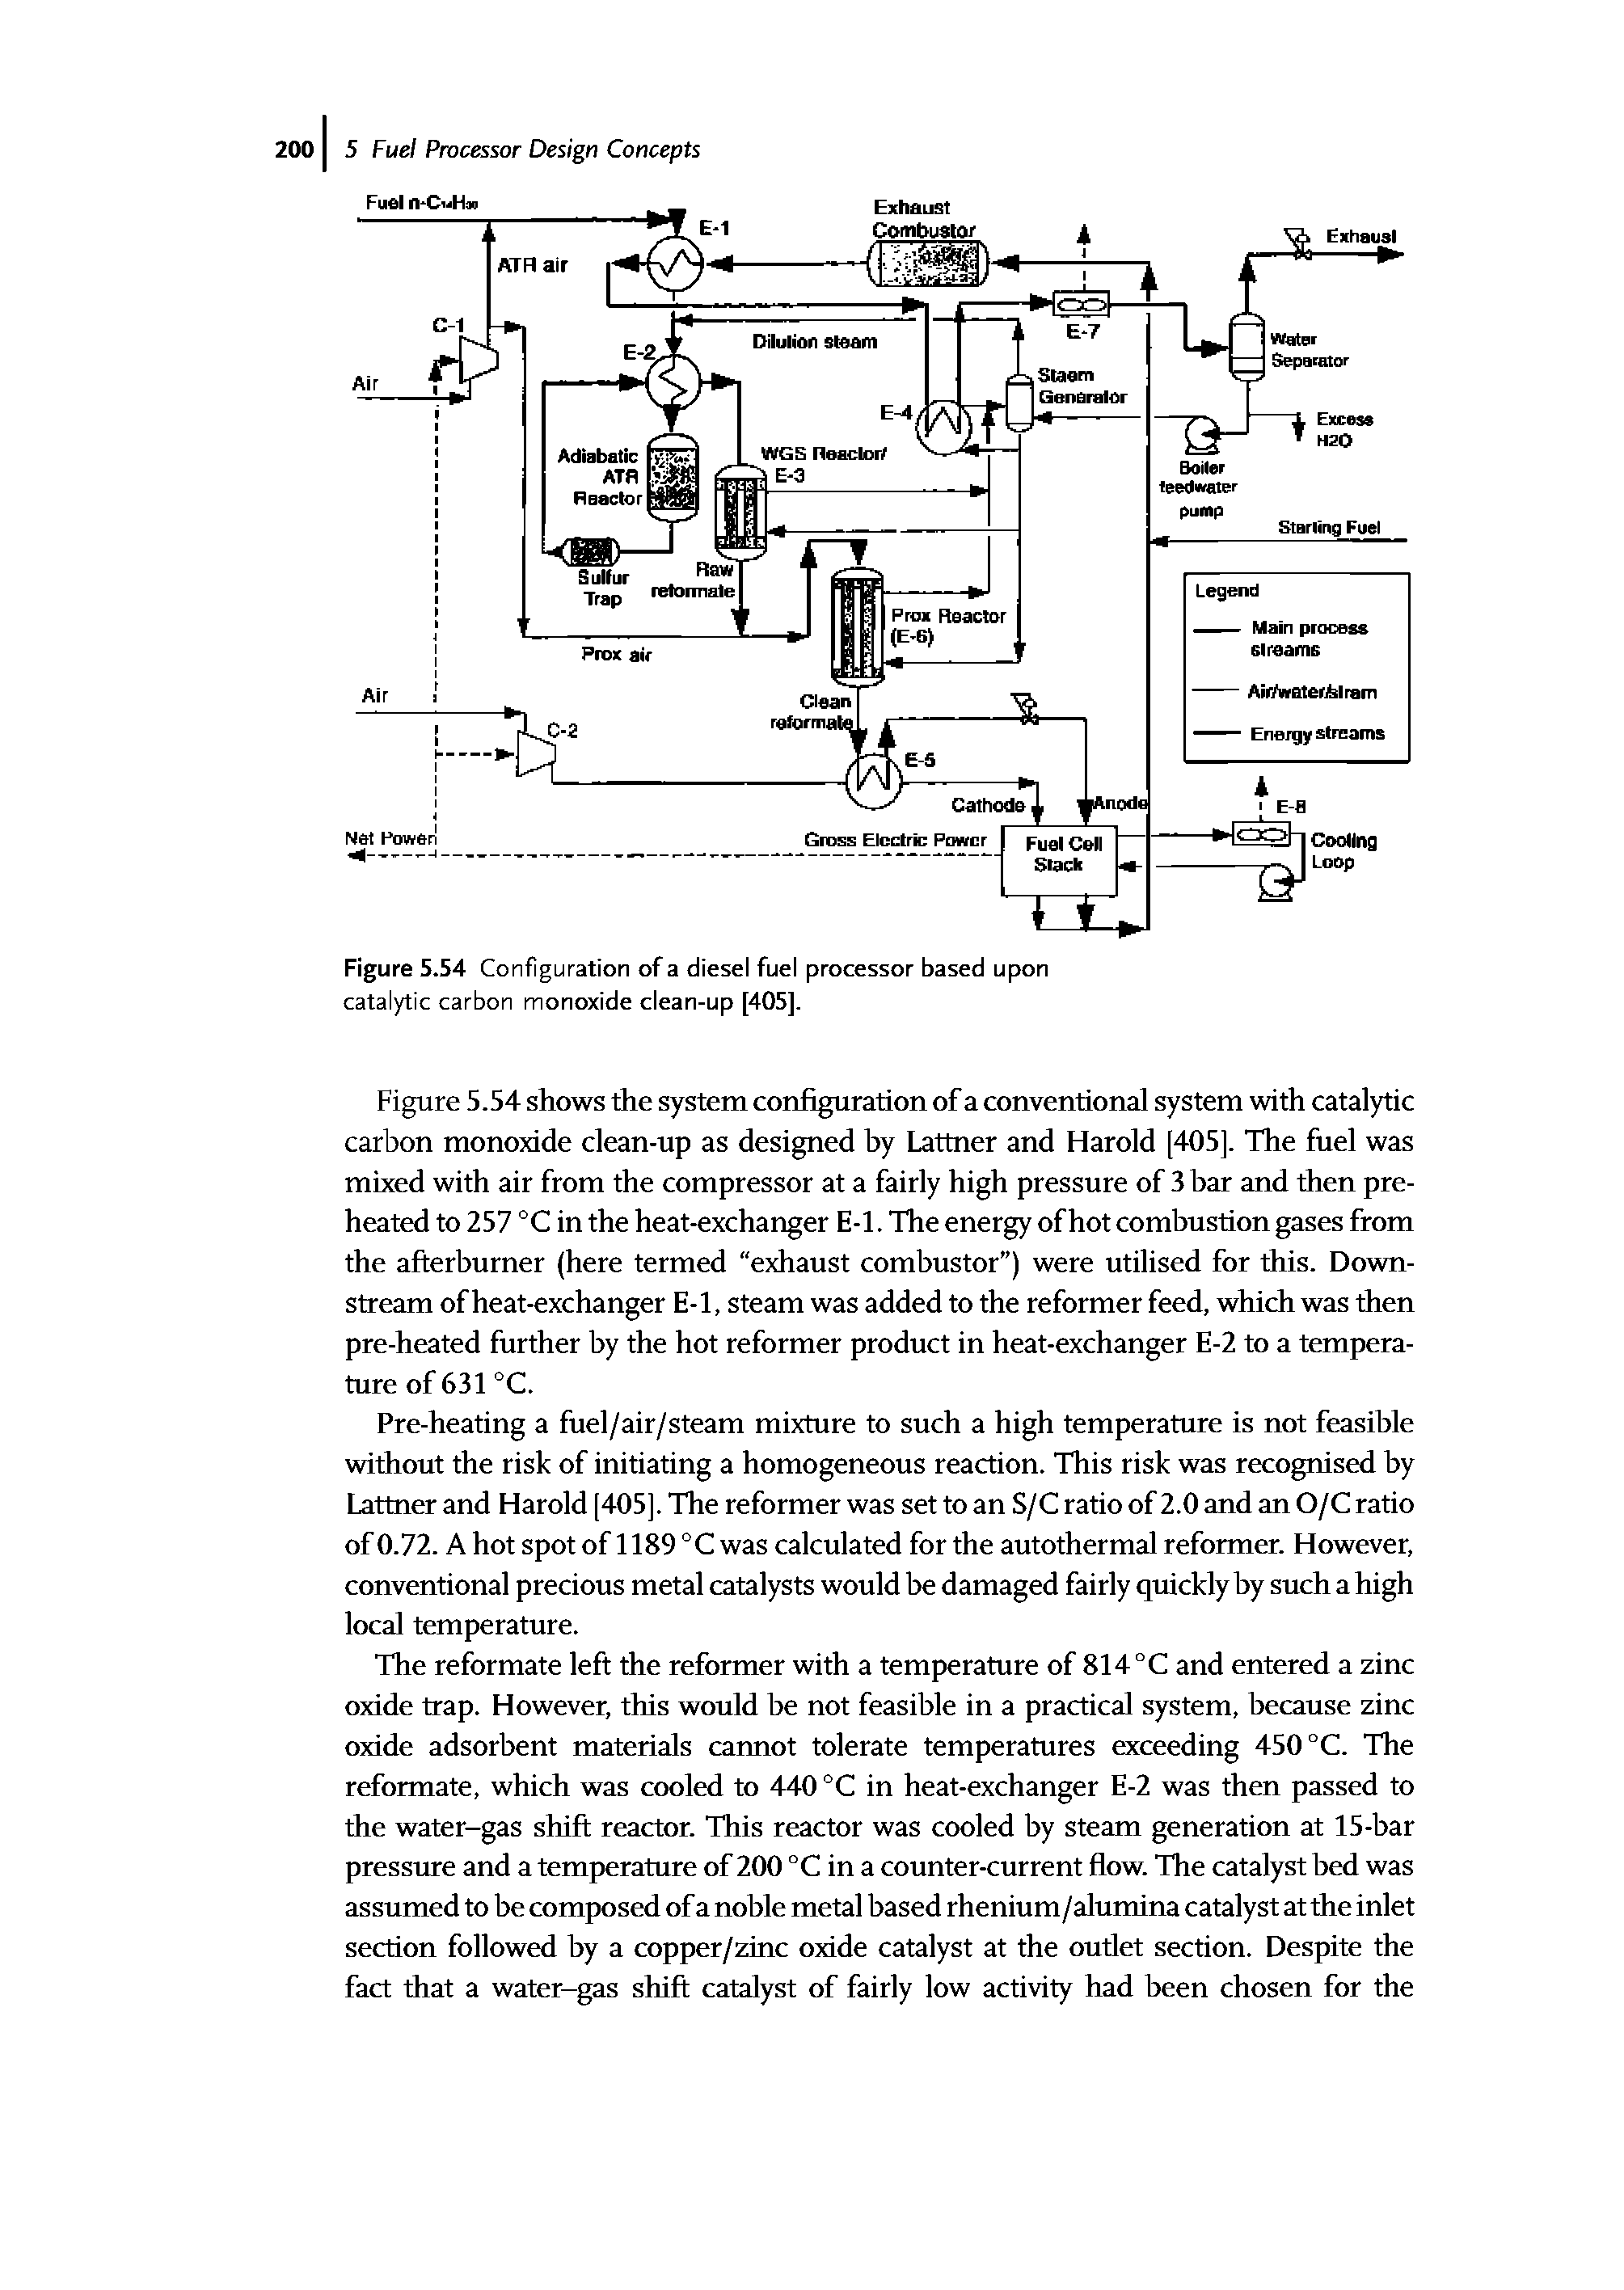 Figure 5.54 Configuration of a diesel fuel processor based upon...